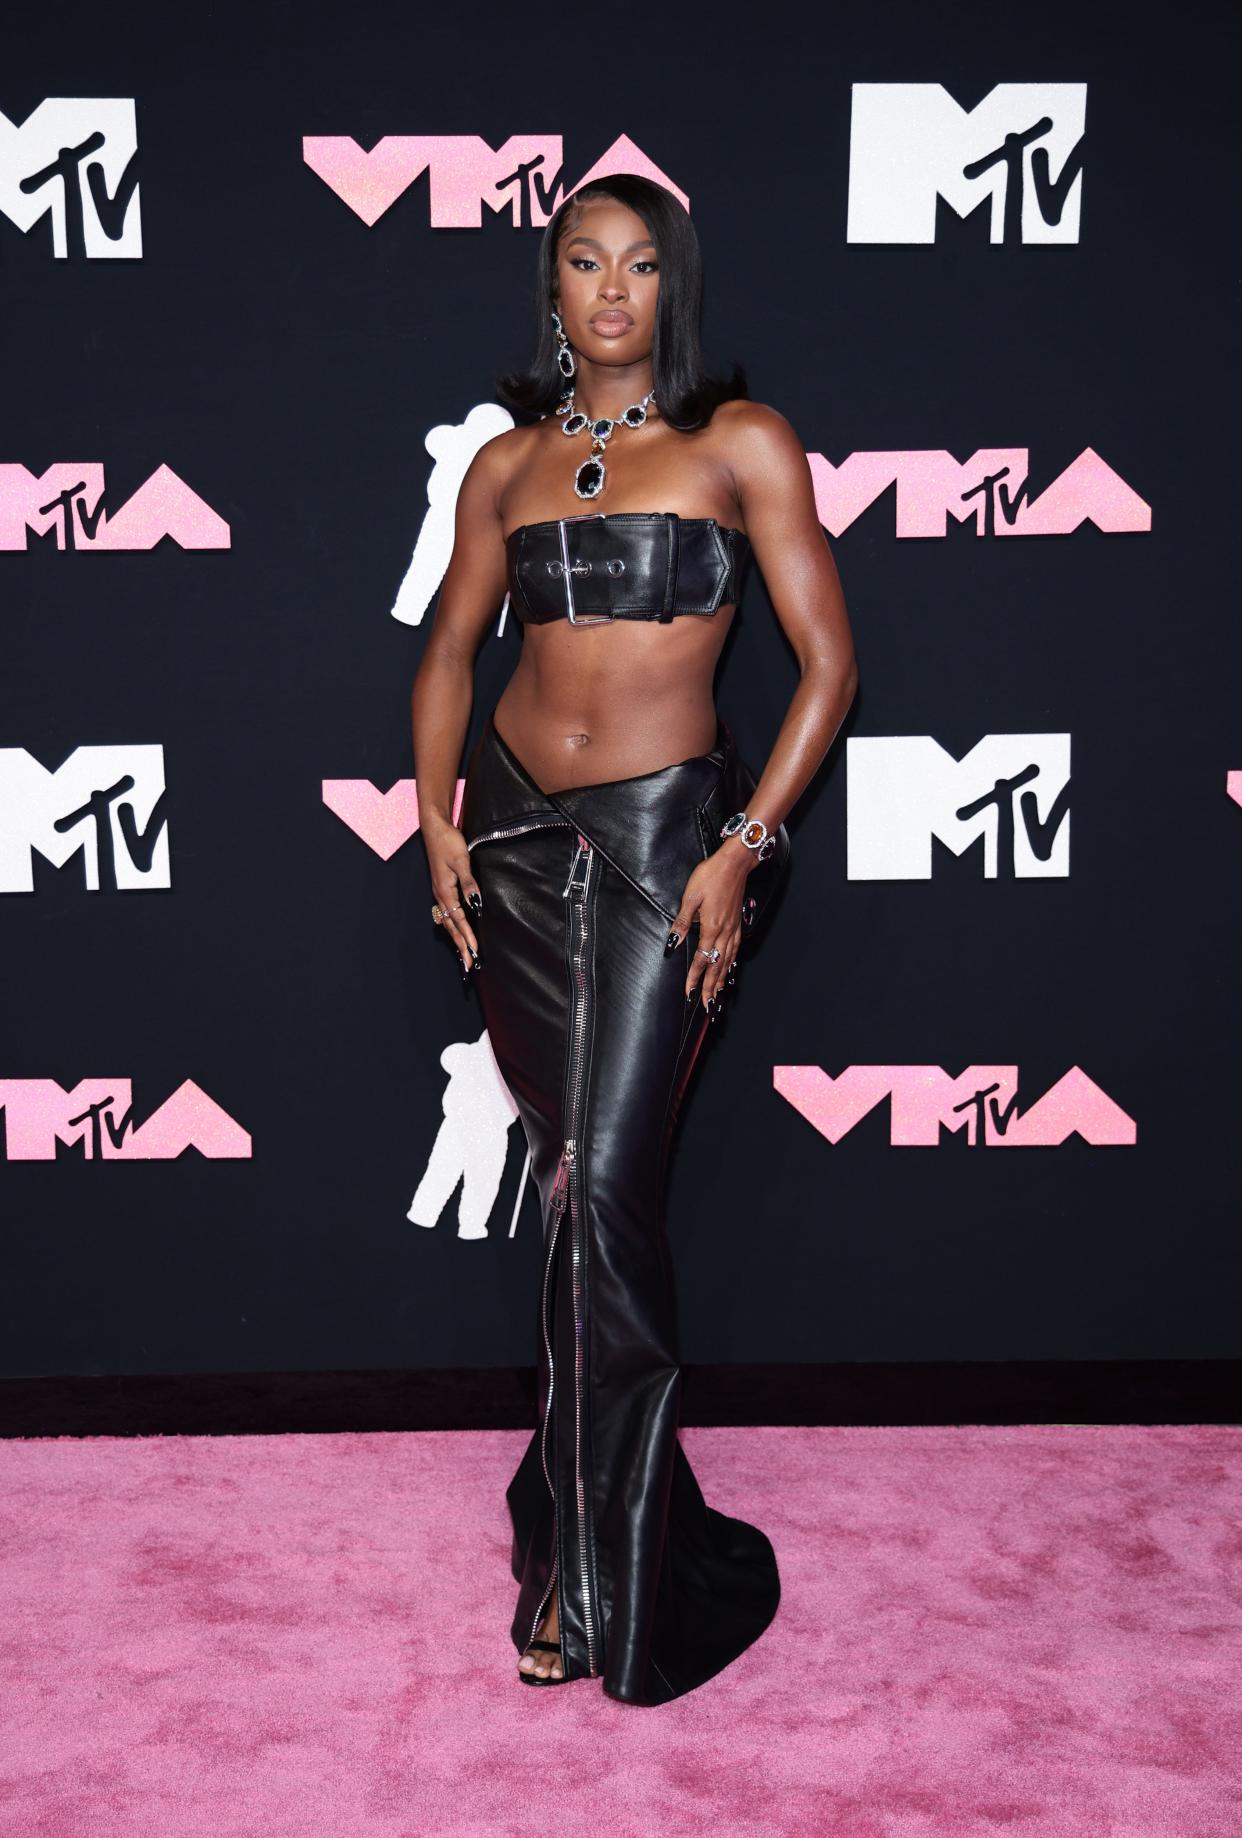 NEWARK, NEW JERSEY - SEPTEMBER 12: Coco Jones attends the 2023 MTV Video Music Awards at the Prudential Center on September 12, 2023 in Newark, New Jersey. (Photo by Dimitrios Kambouris/Getty Images) ORG XMIT: 776018641 ORIG FILE ID: 1676932365